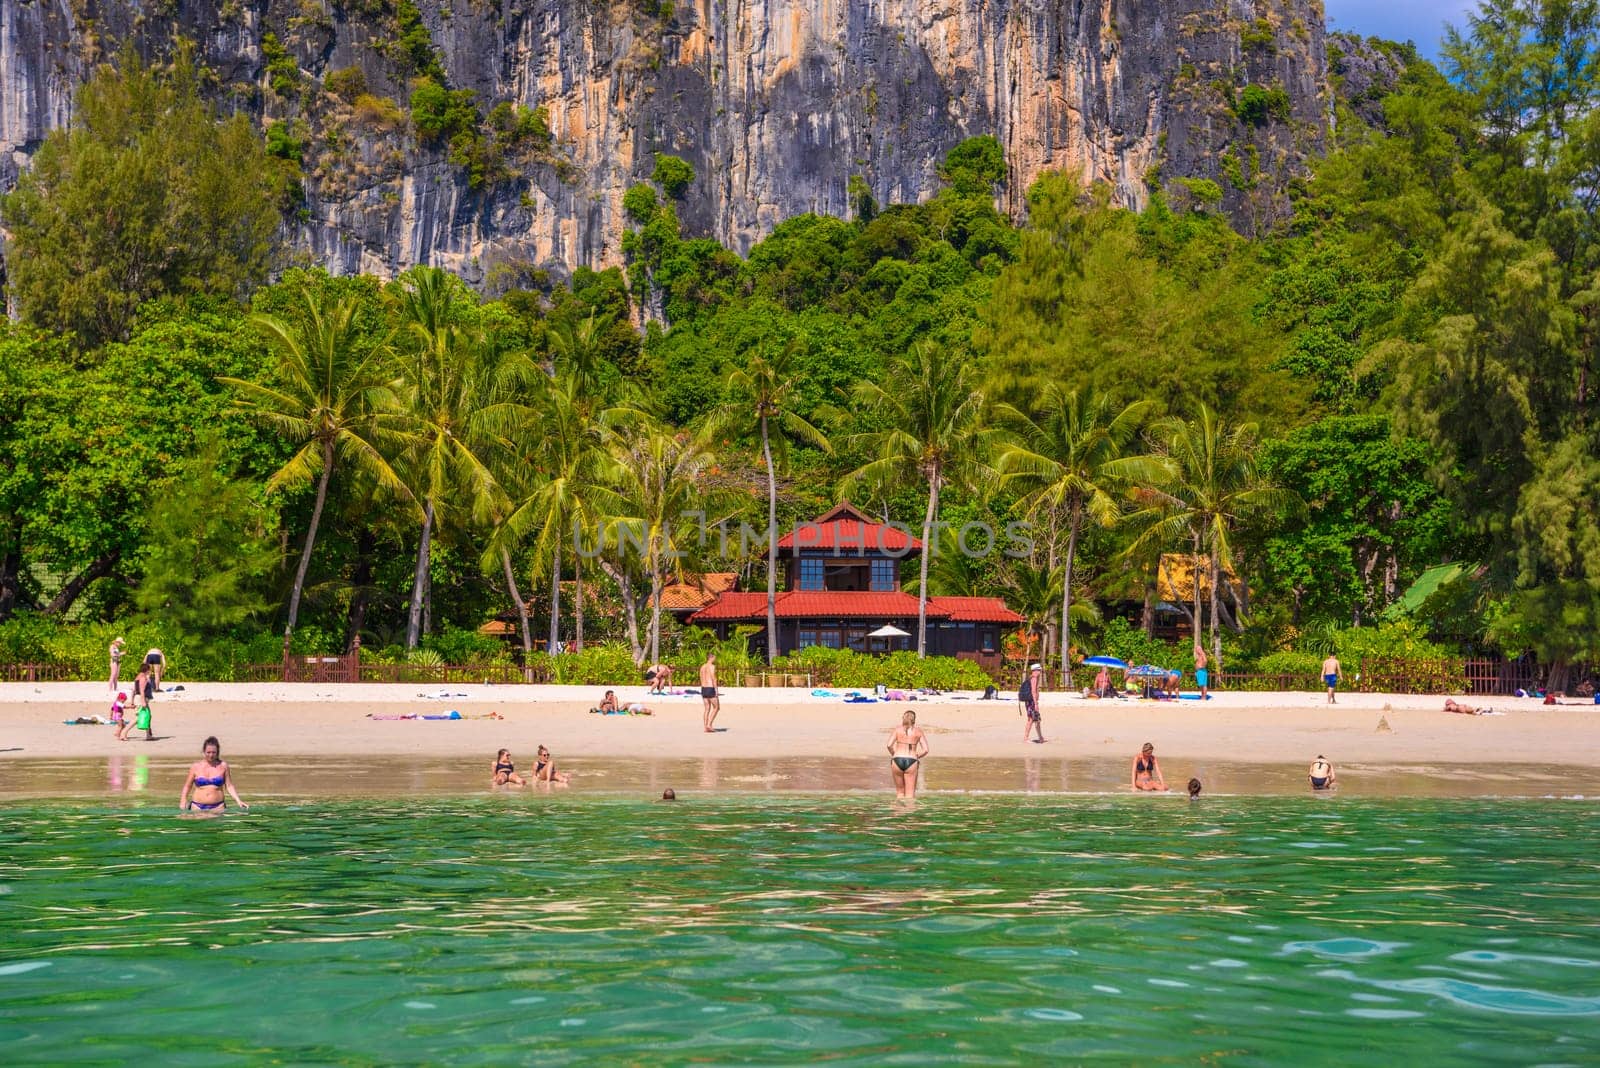 Bungalow house with red roof among coconut palms near the cliffs with people sunbathing and swimming in emerald water on Railay beach west, Ao Nang, Krabi, Thailand.